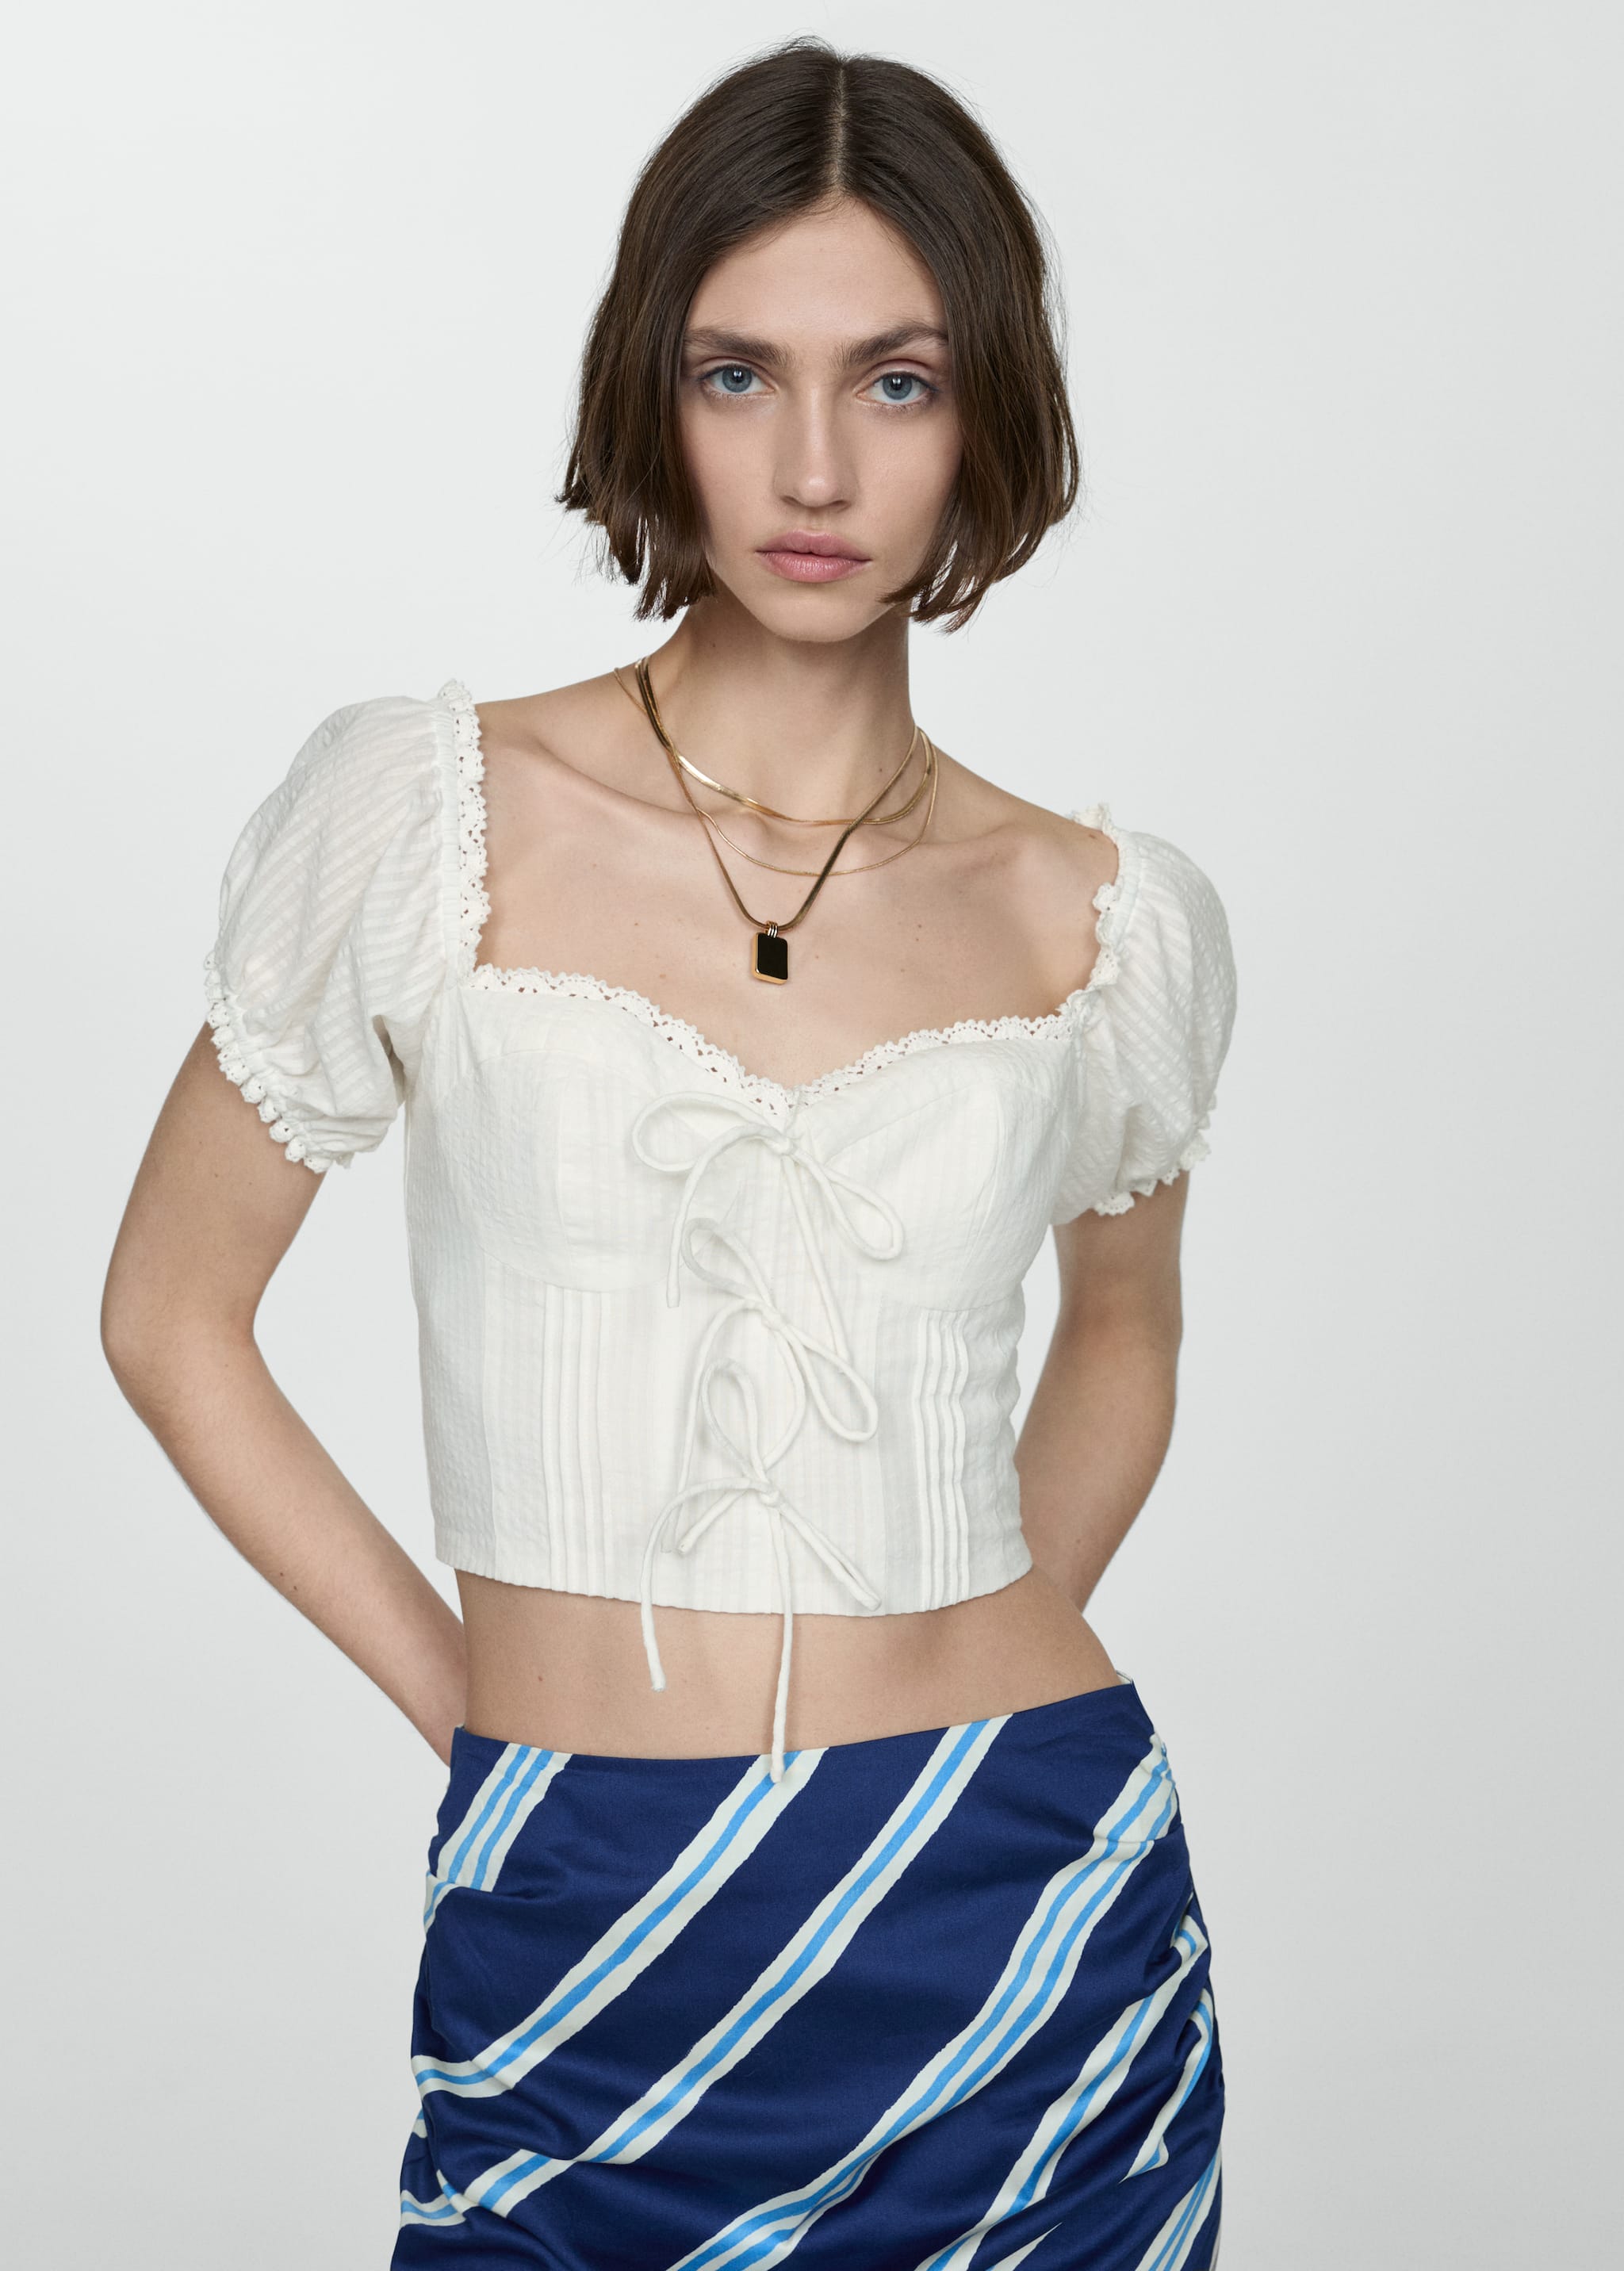  Crop blouse with bow detail - Medium plane